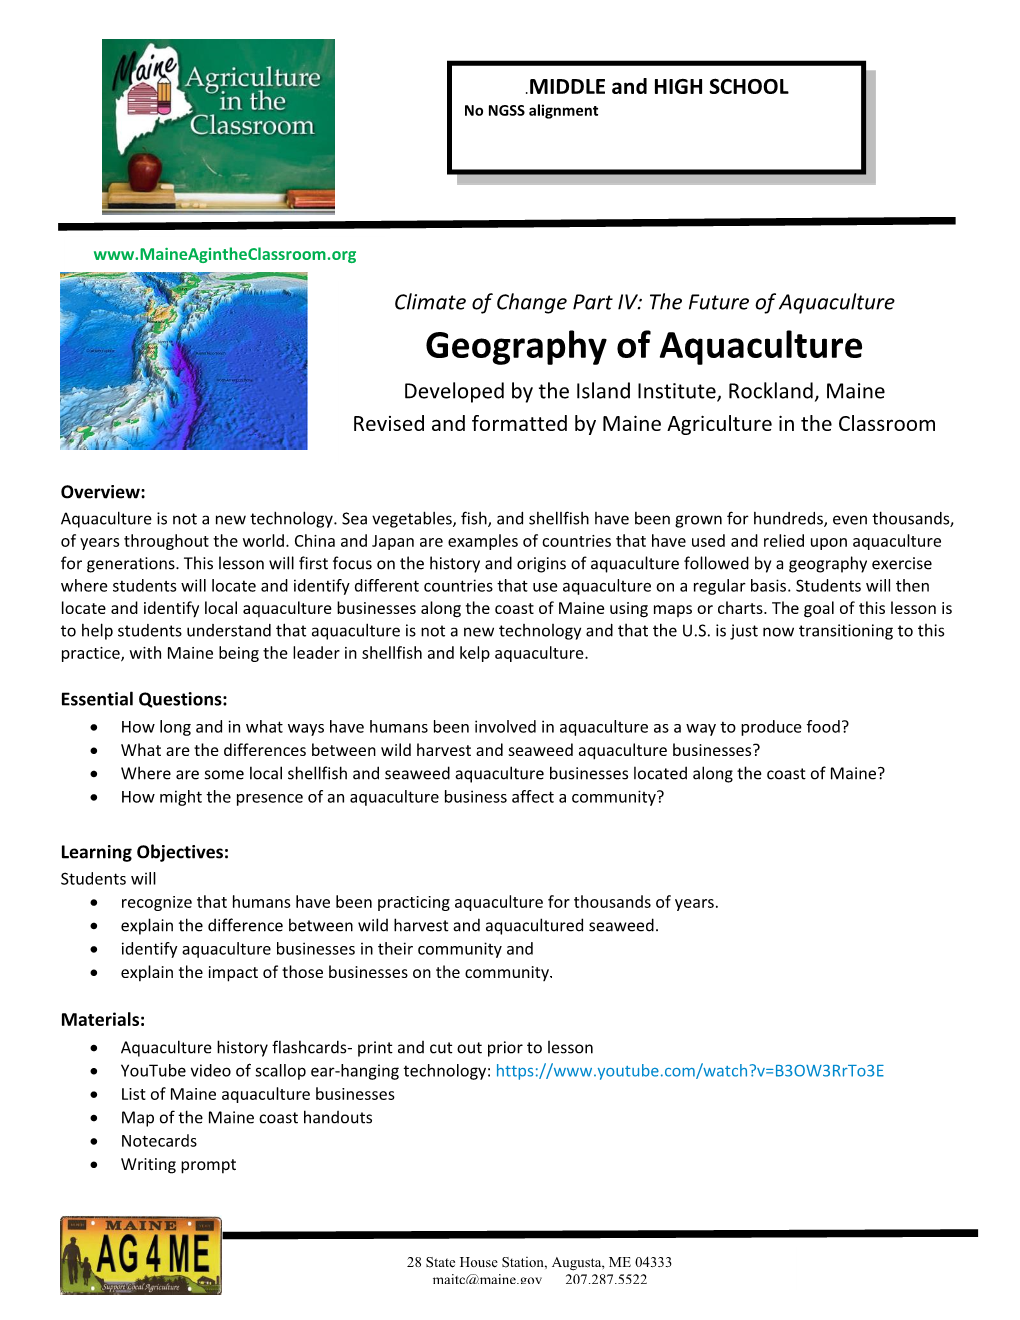 Geography of Aquaculture Developed by the Island Institute, Rockland, Maine Revised and Formatted by Maine Agriculture in the Classroom